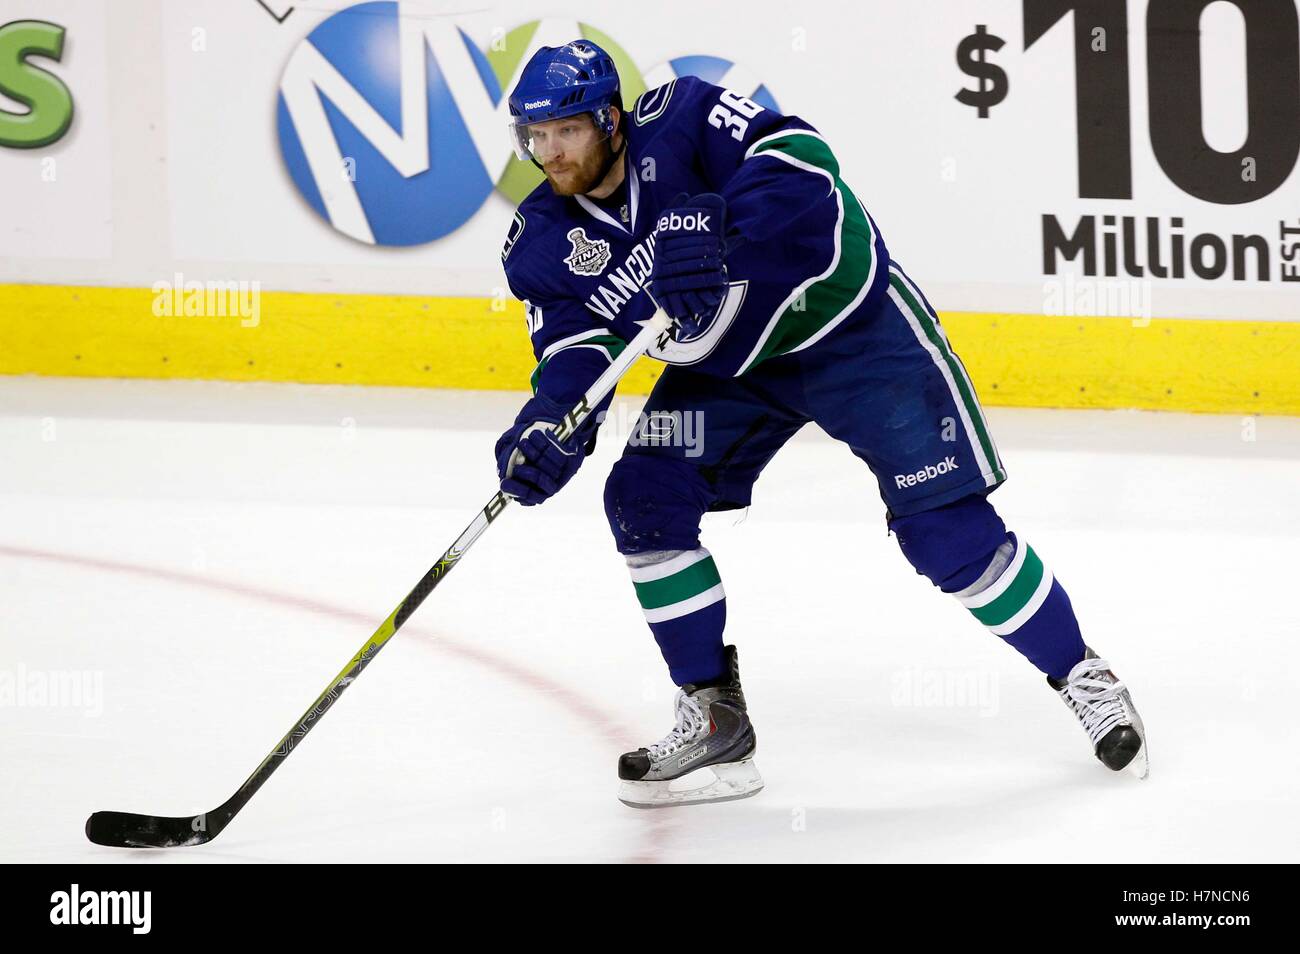 June 1, 2011; Vancouver, BC, CANADA; Vancouver Canucks center Ryan Kesler  (17) during game one of the 2011 Stanley Cup Finals against the Boston  Bruins at Rogers Arena. The Canucks won 1-0 Stock Photo - Alamy